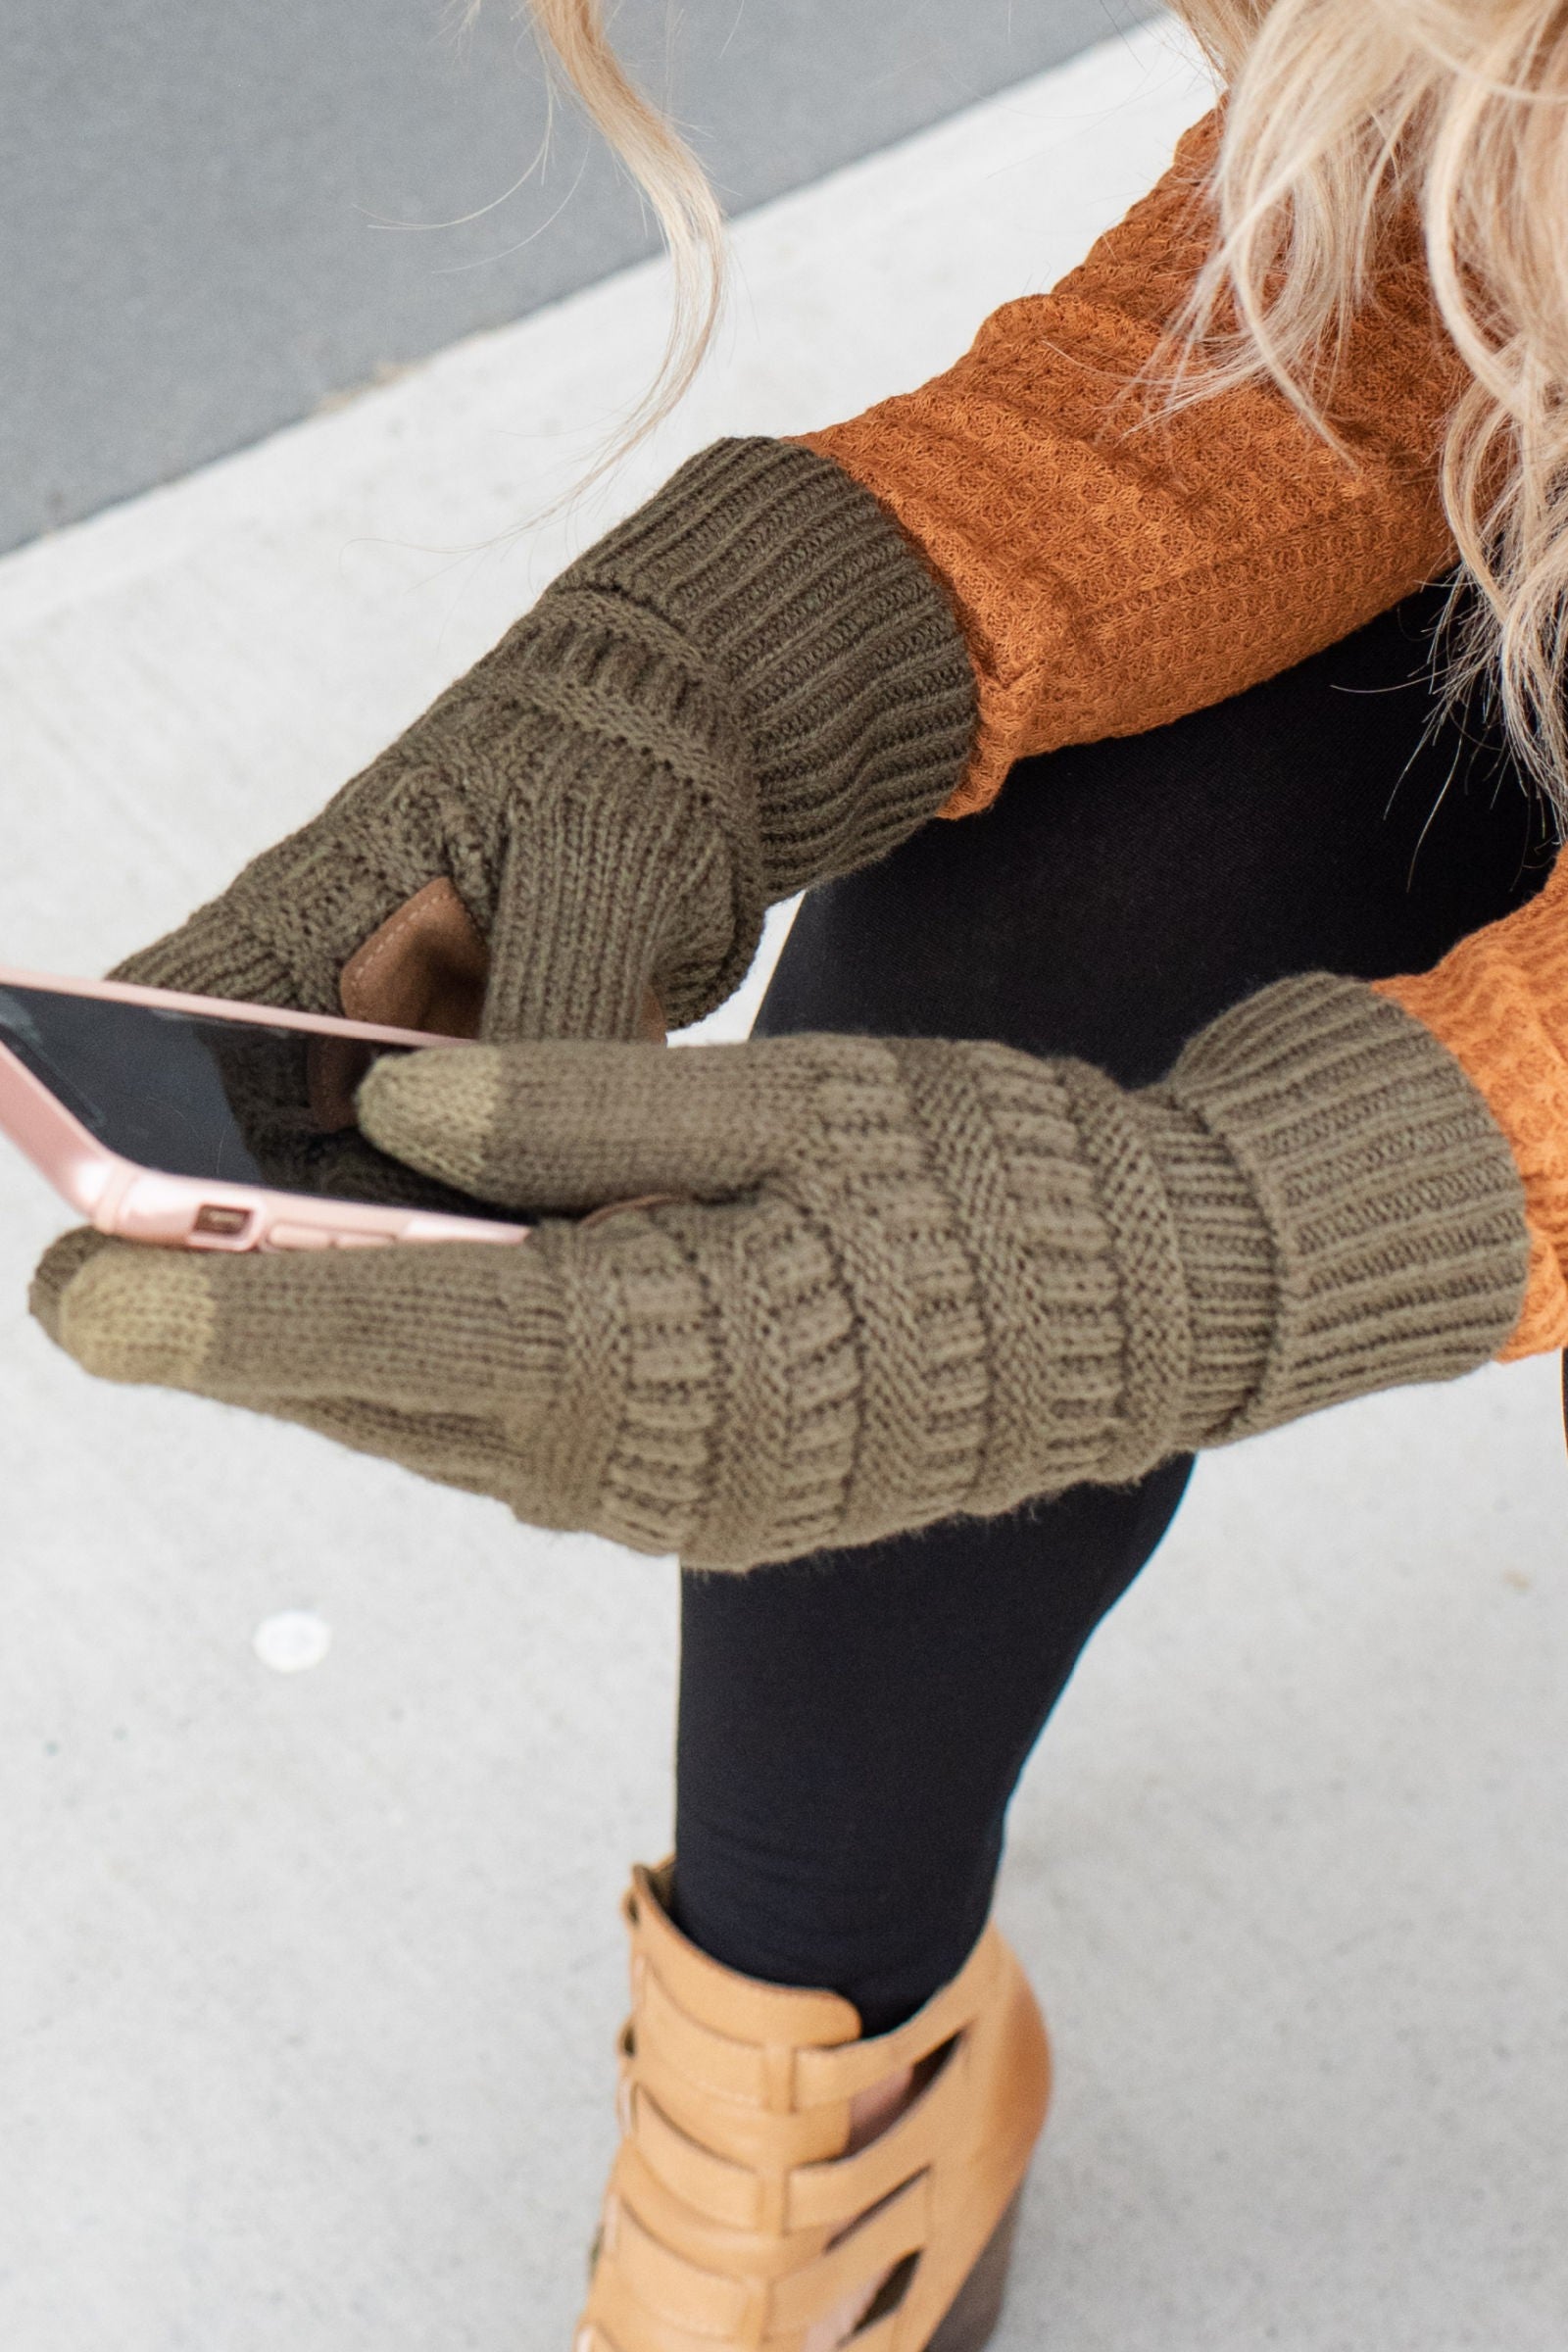 CC Touchscreen Gloves - 4 Colors